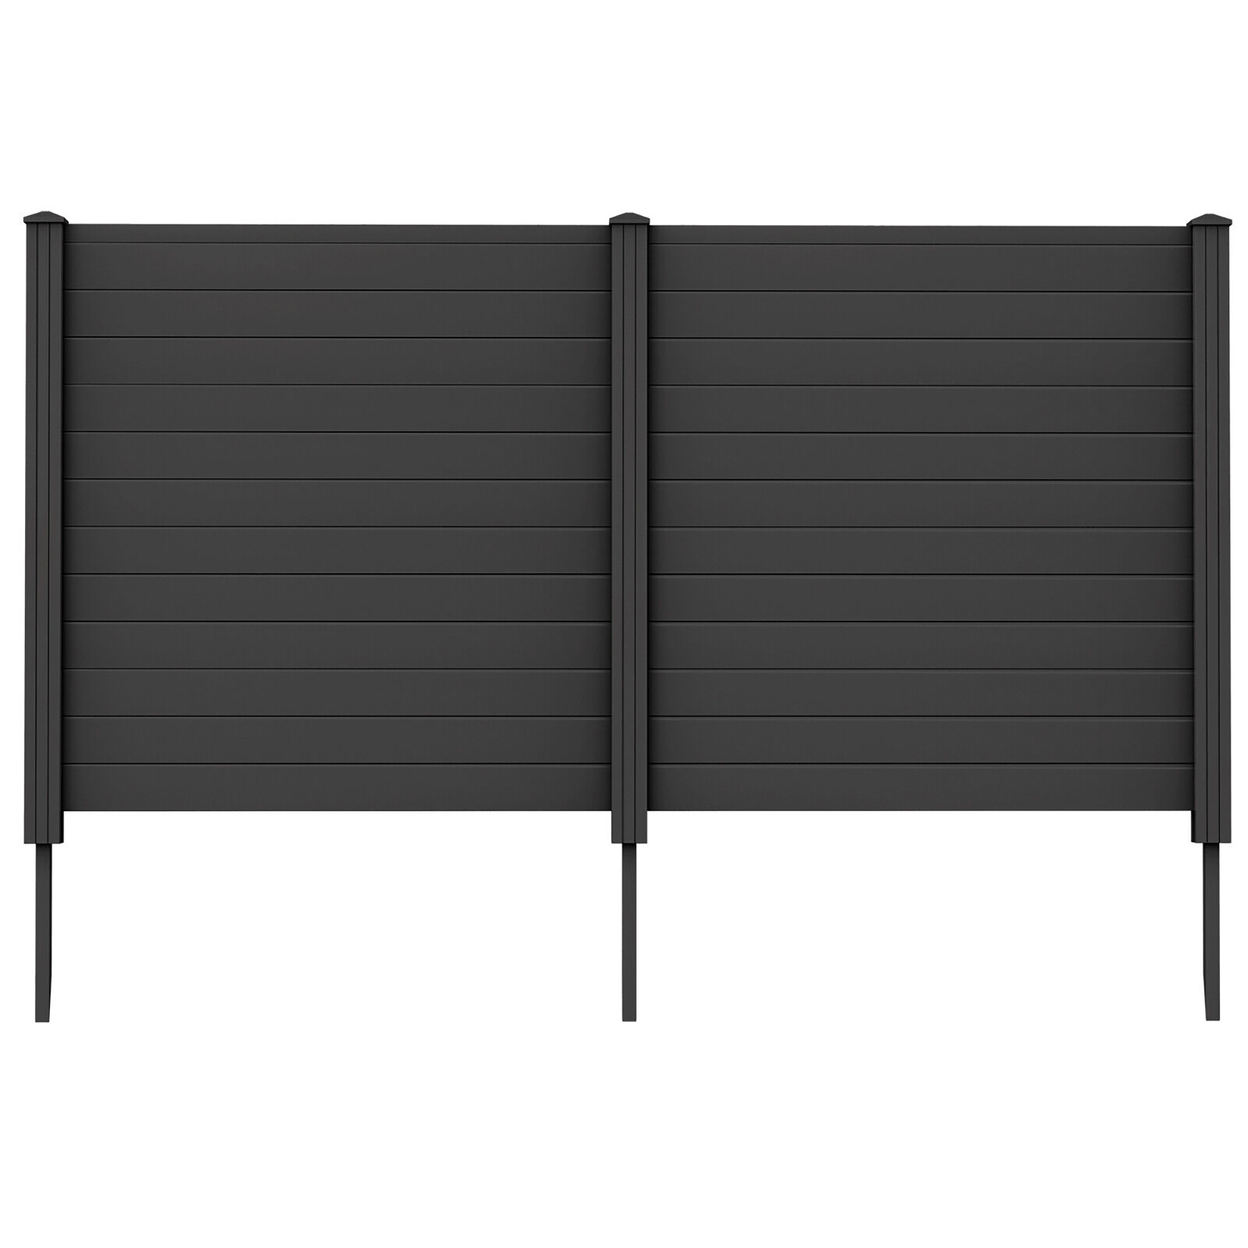 Outdoor PVC Privacy Panels 2-Pack Picket Fence W/ 3 Cuspidal Foot Stakes Black